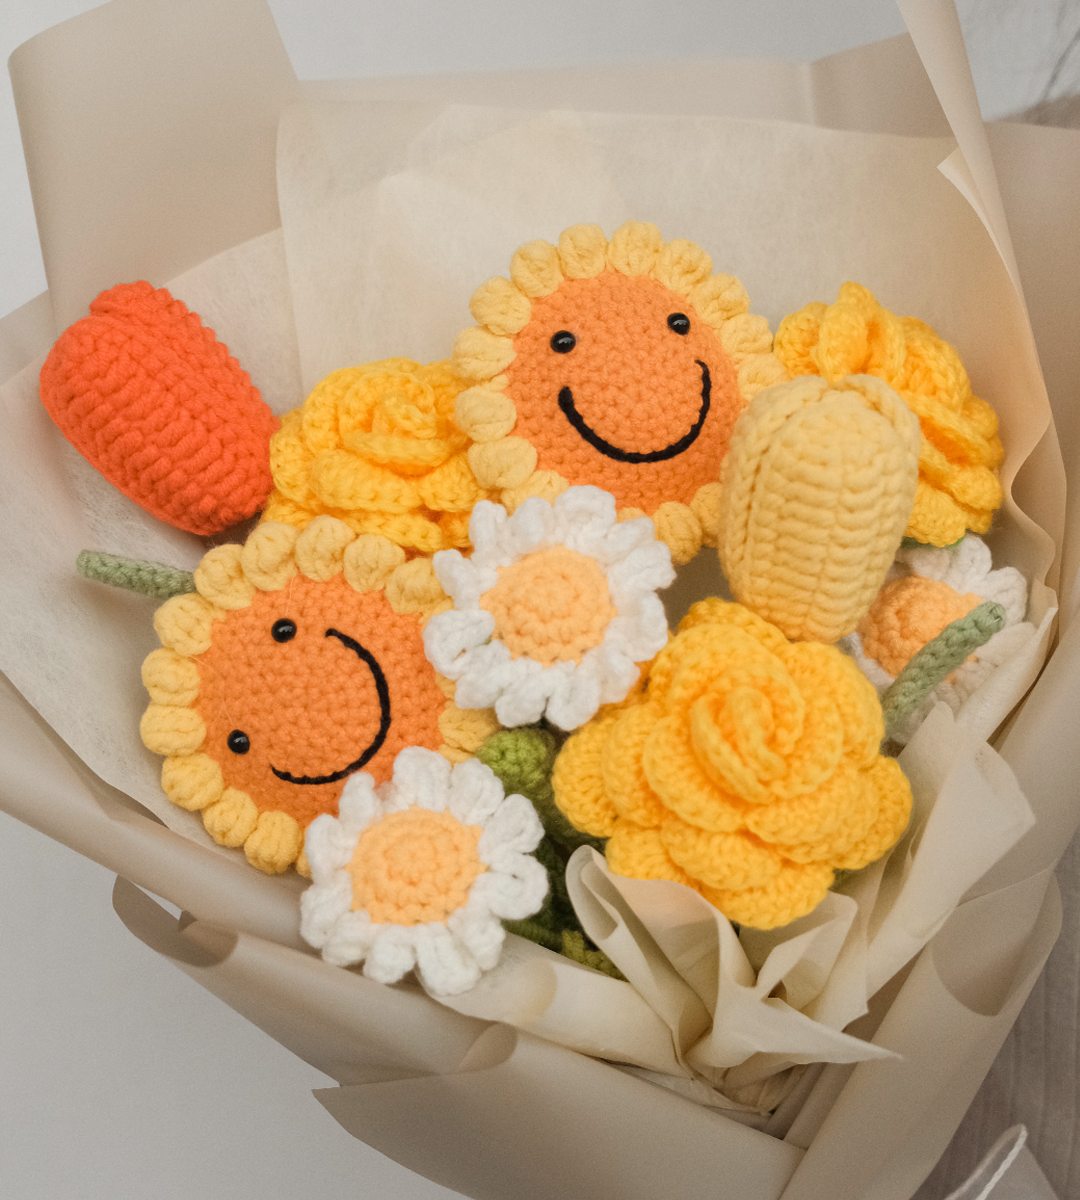 💐 Dreamy Sunflower Roses, Unique Gift, Flowers for All Occasions